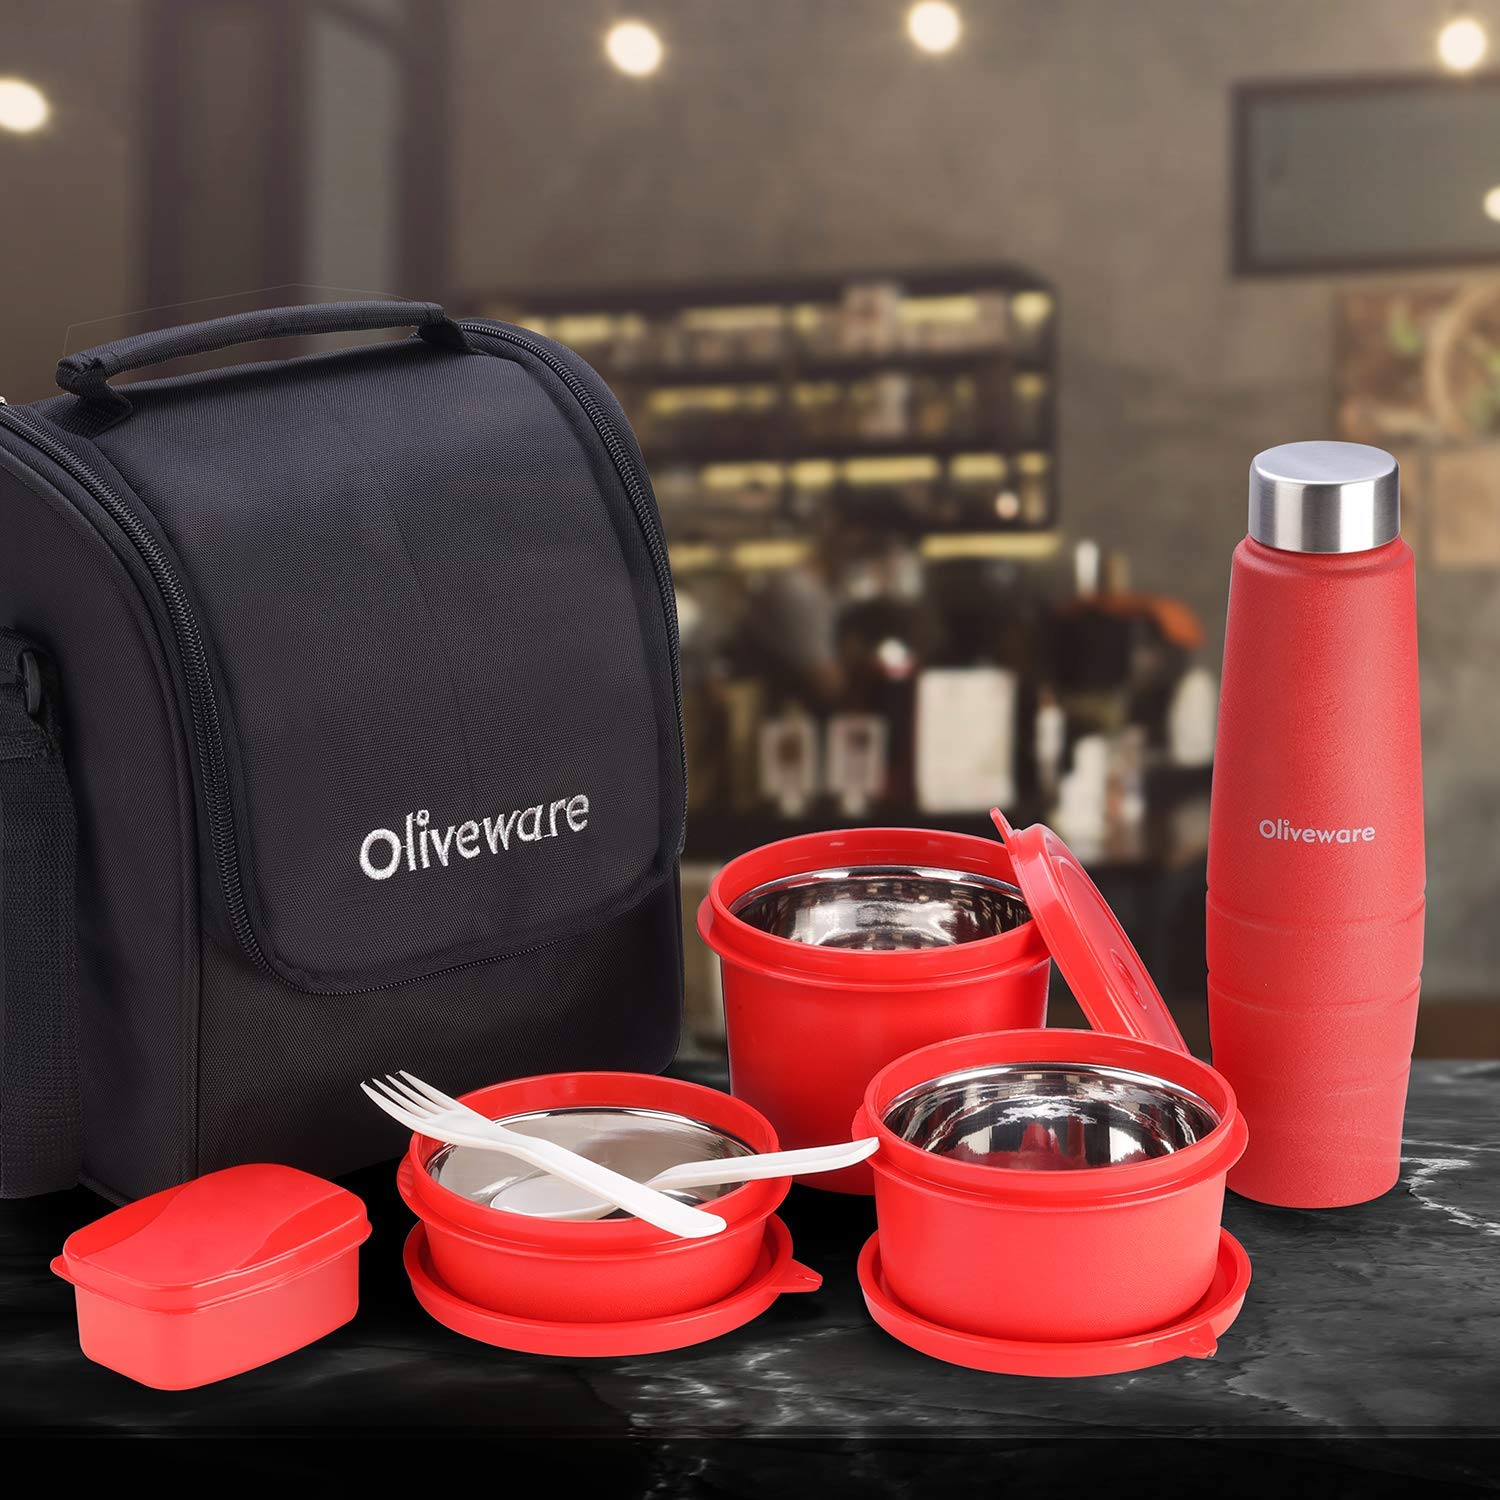 Oliveware Teso Lunch Box with Bottle - Red | 3 Stainless Steel ...